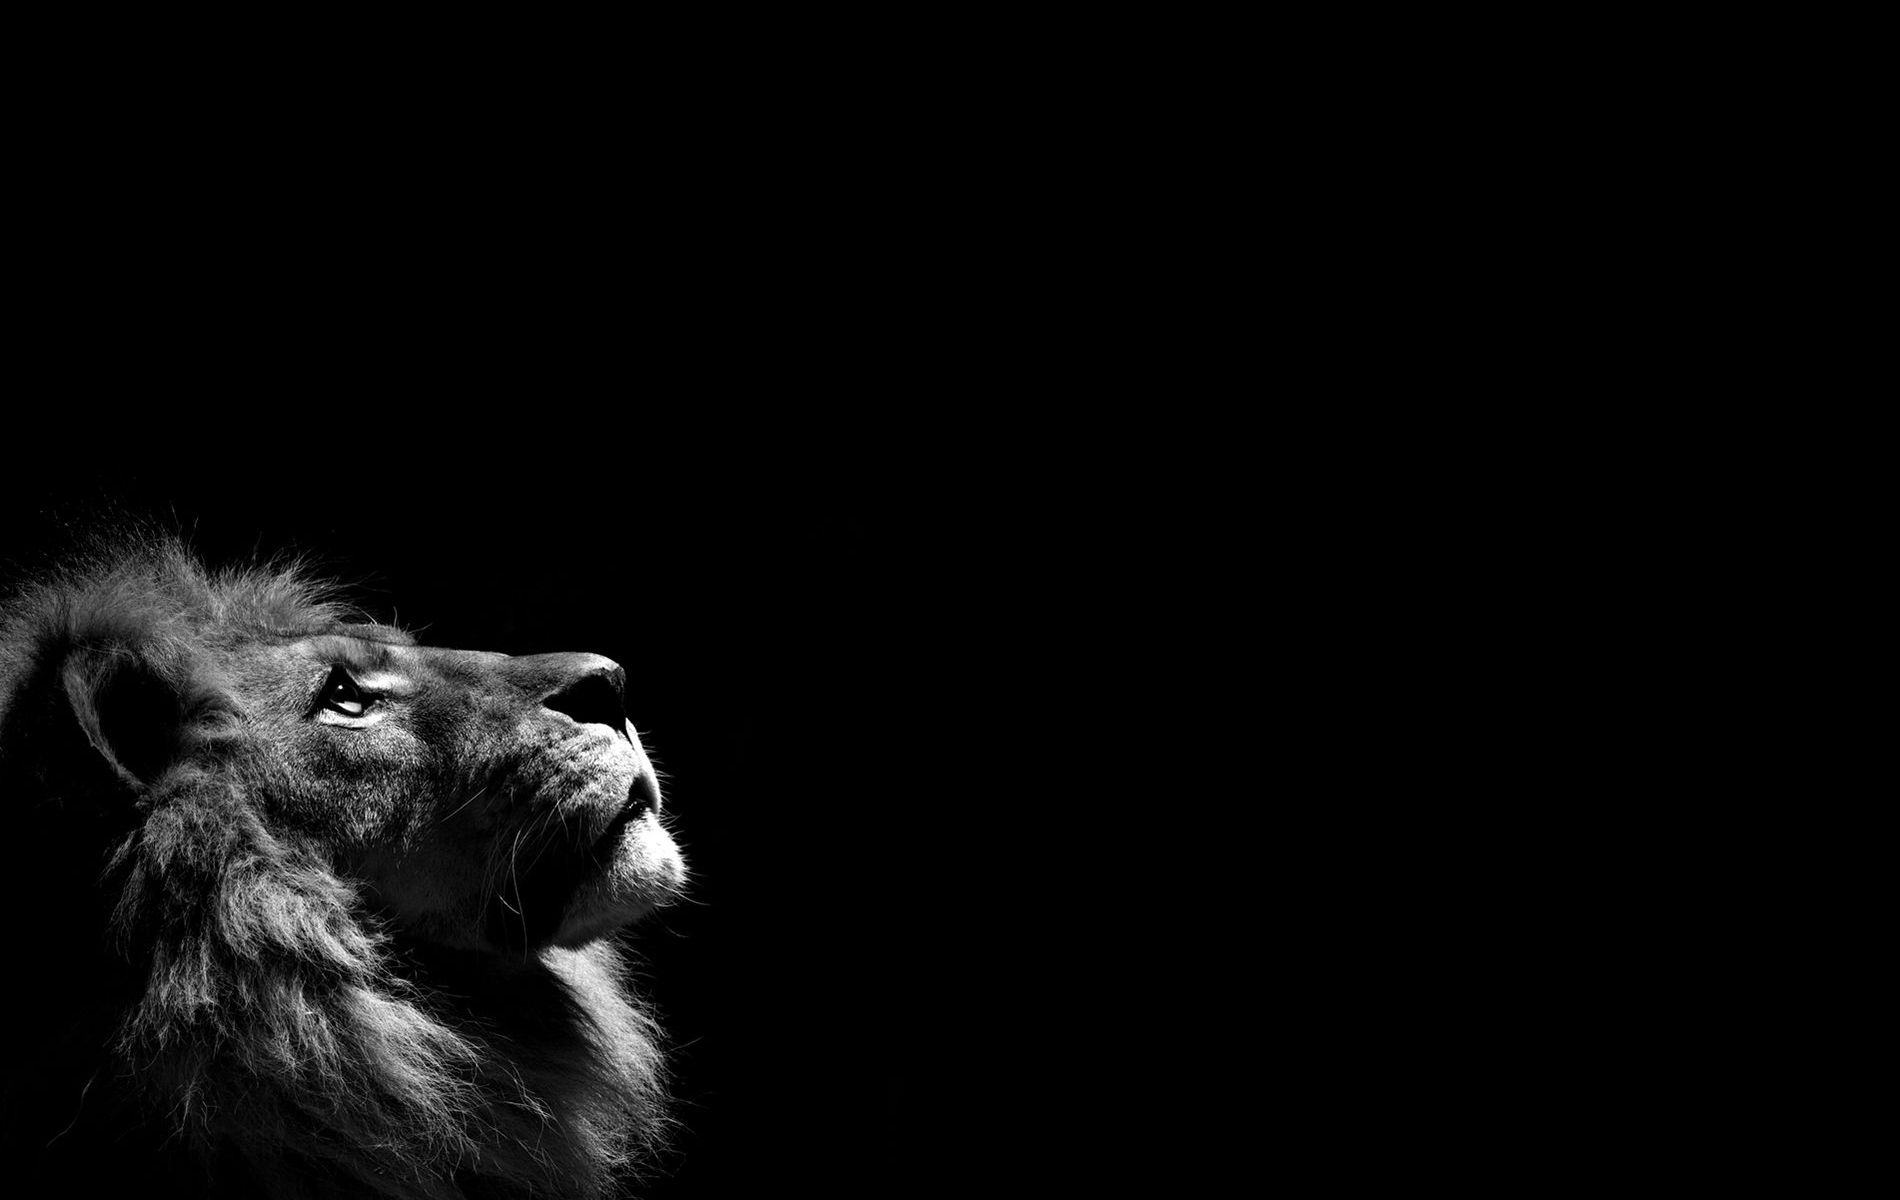 Download Wallpaper, Download 1900x1200 dark photography grayscale lions black background 1900x1200 wallpaper Wallpaper –Free Wallpaper Download